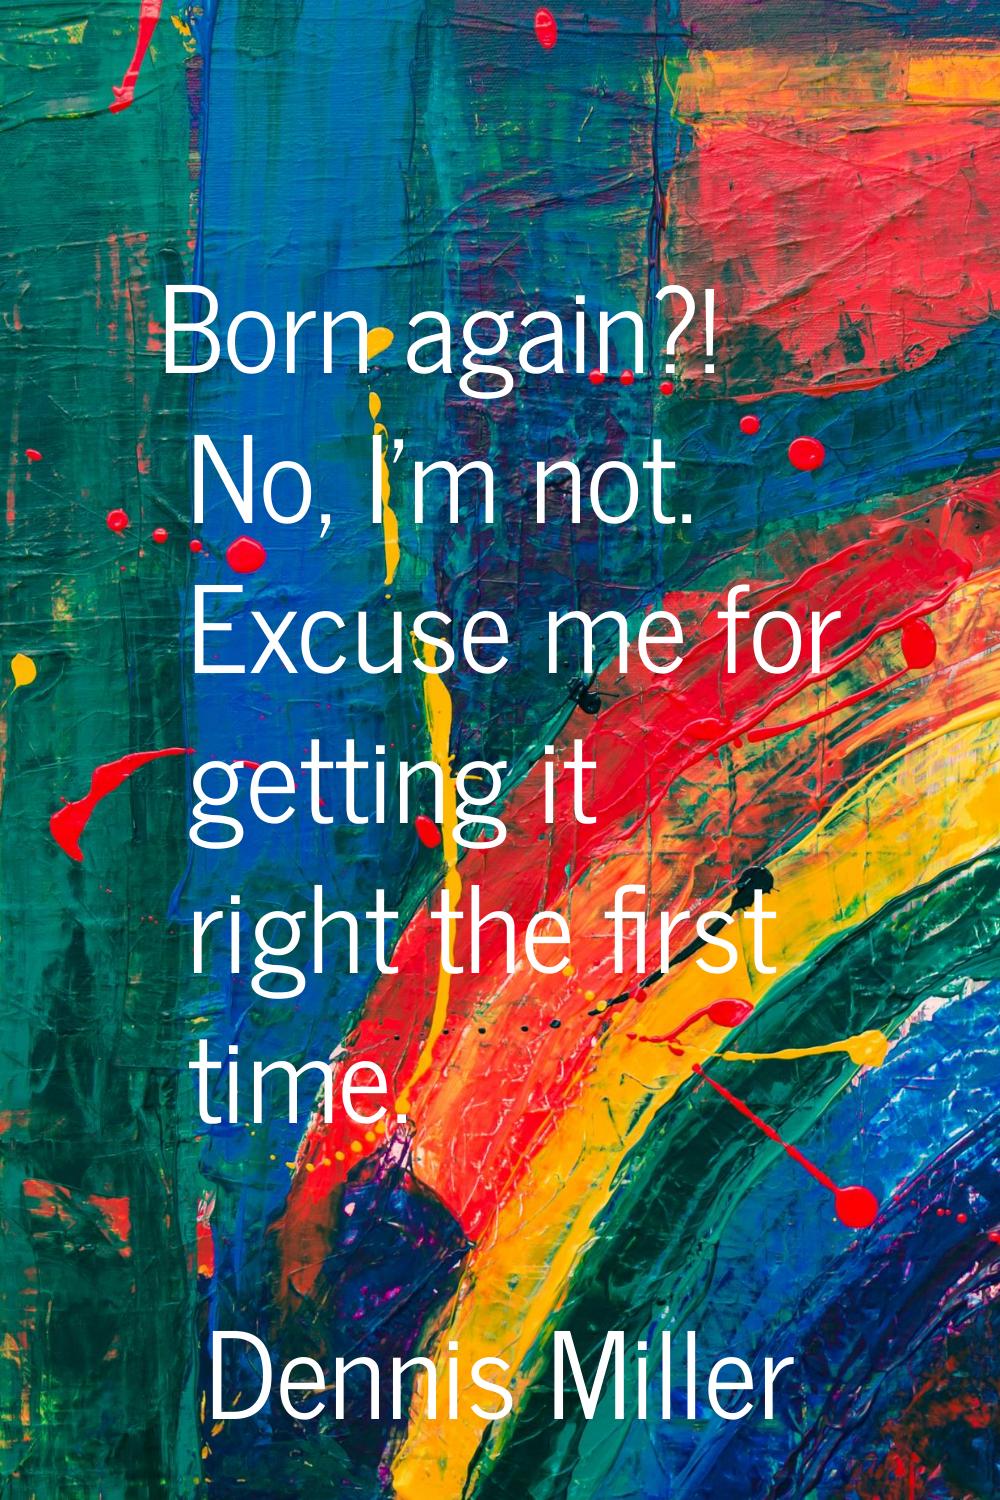 Born again?! No, I'm not. Excuse me for getting it right the first time.